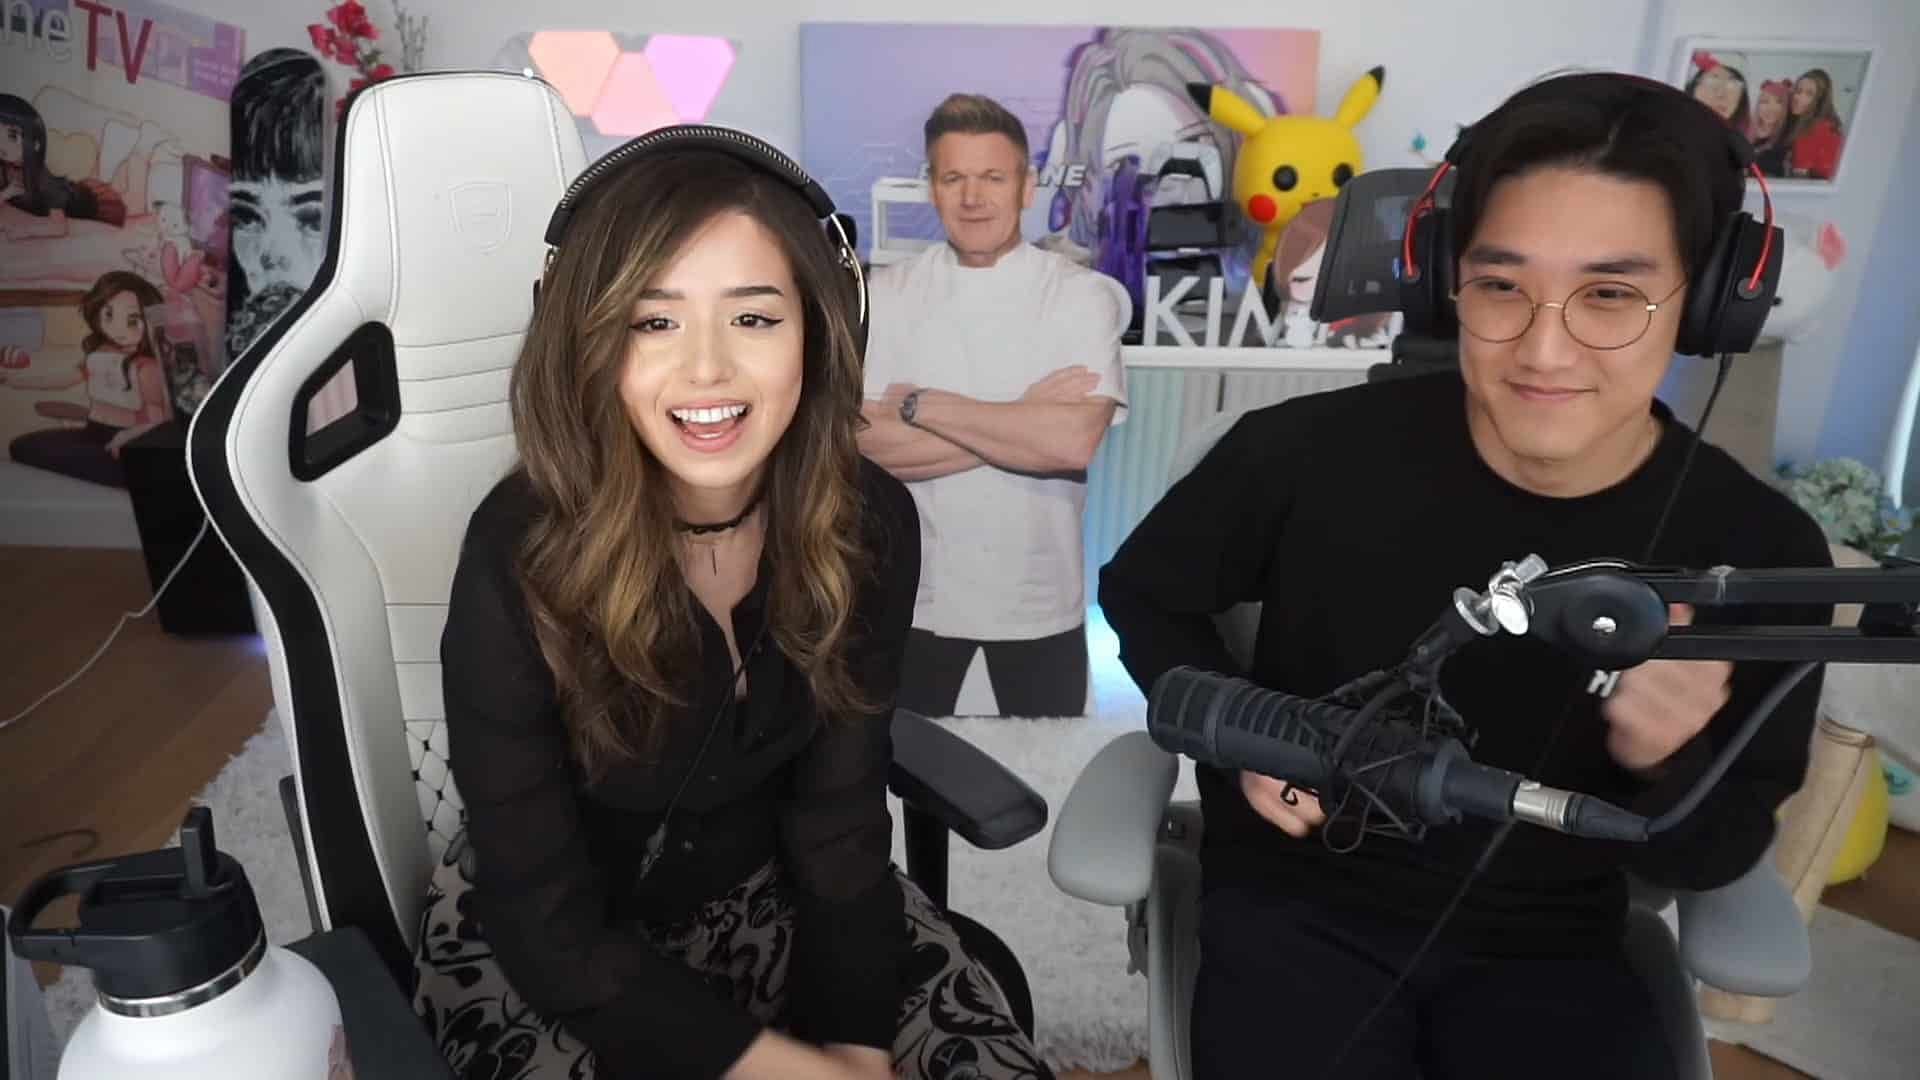 Pokimane shocked by Kevin&#039;s inappropriate comment on her livestream (Image via Pokimane on Twitch)